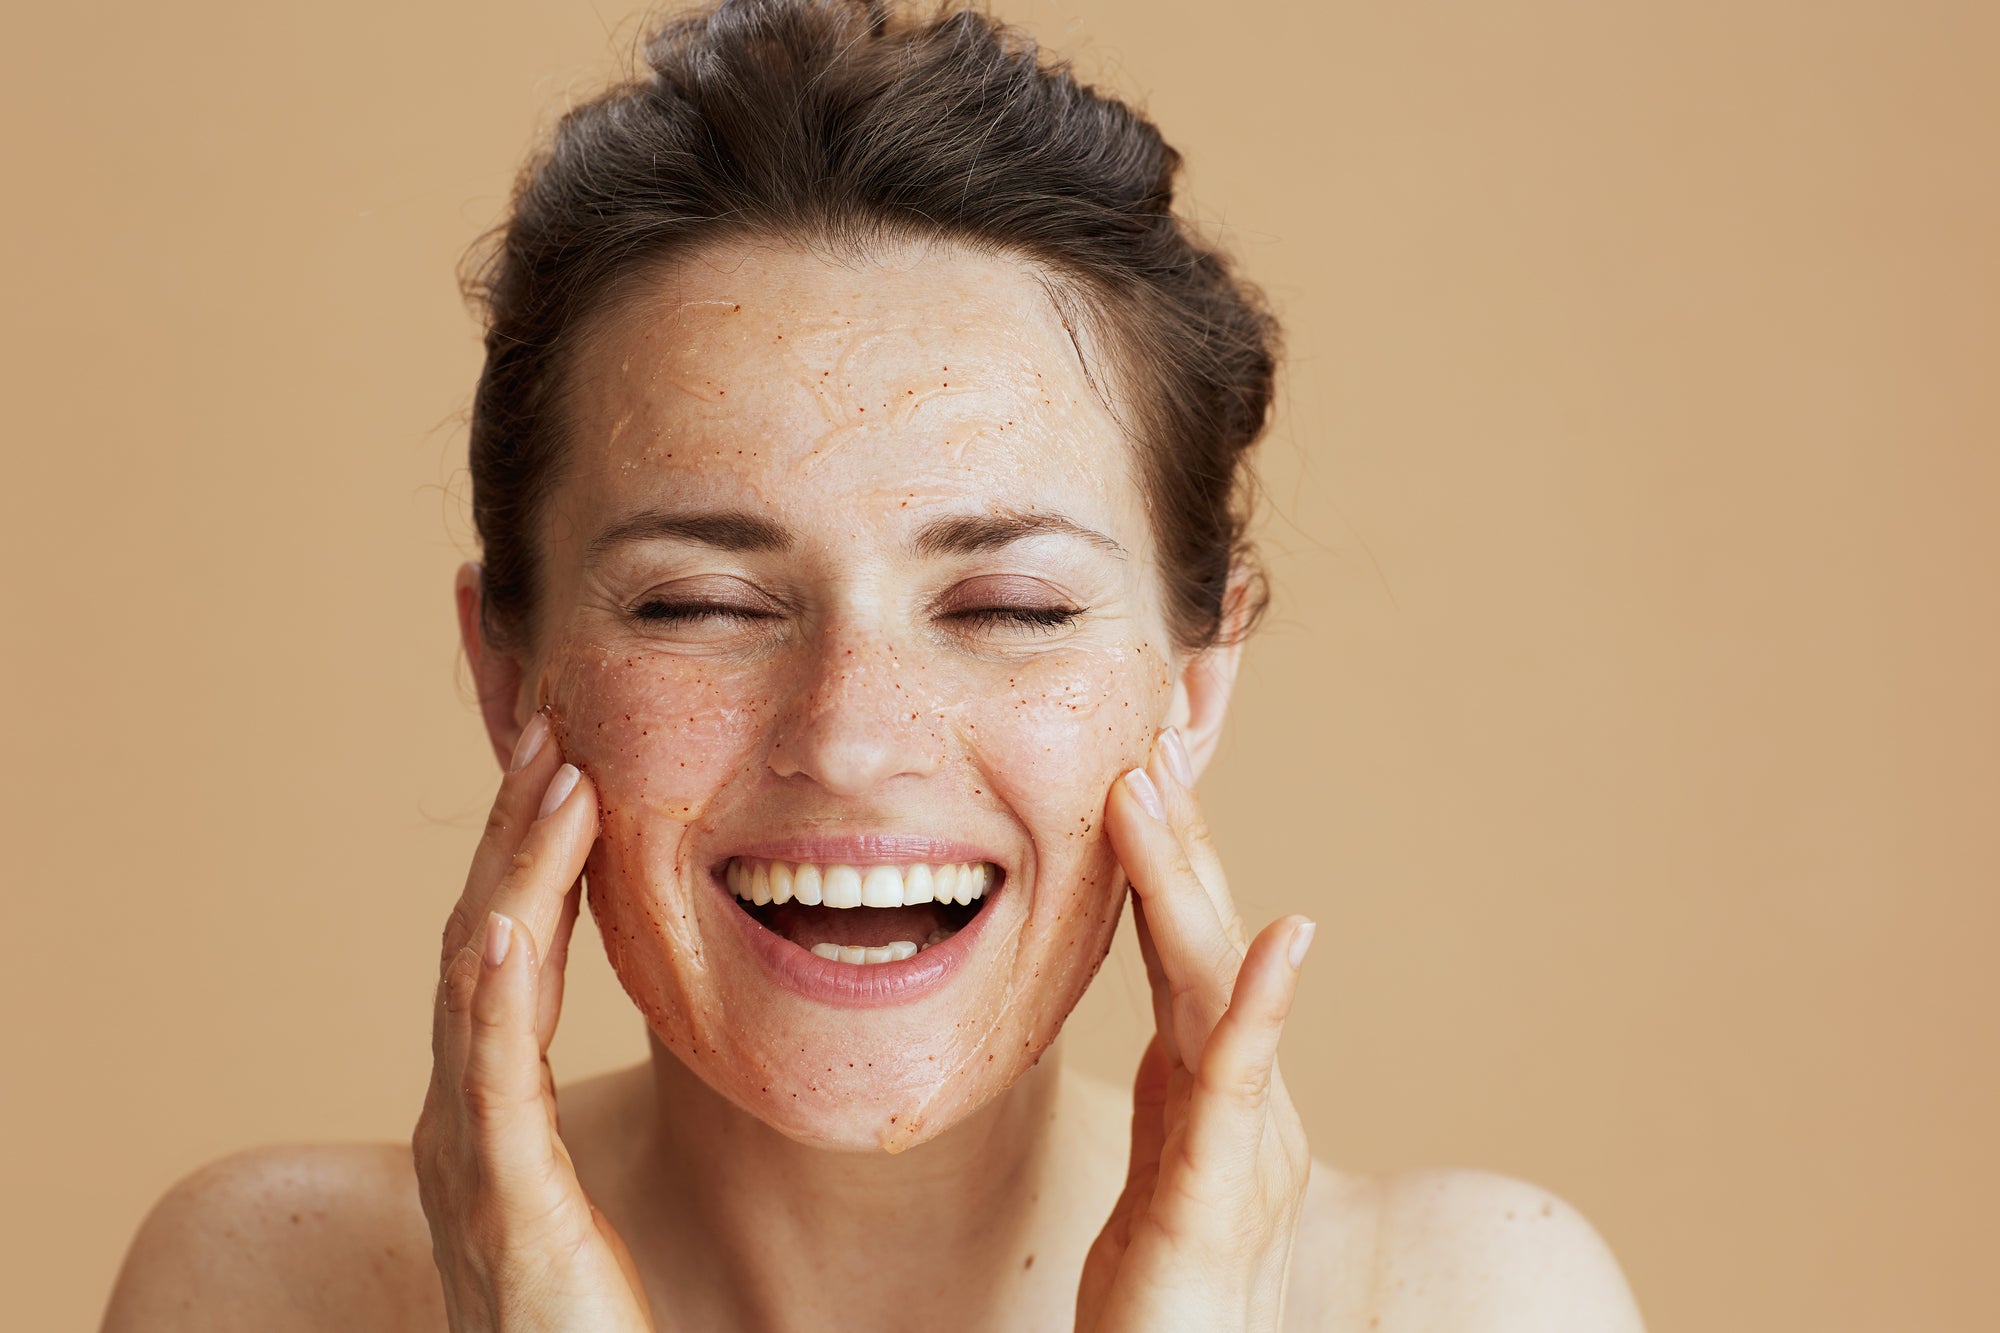 beautiful woman exfoliating her skin - 4 ways exfoliation can help you look younger